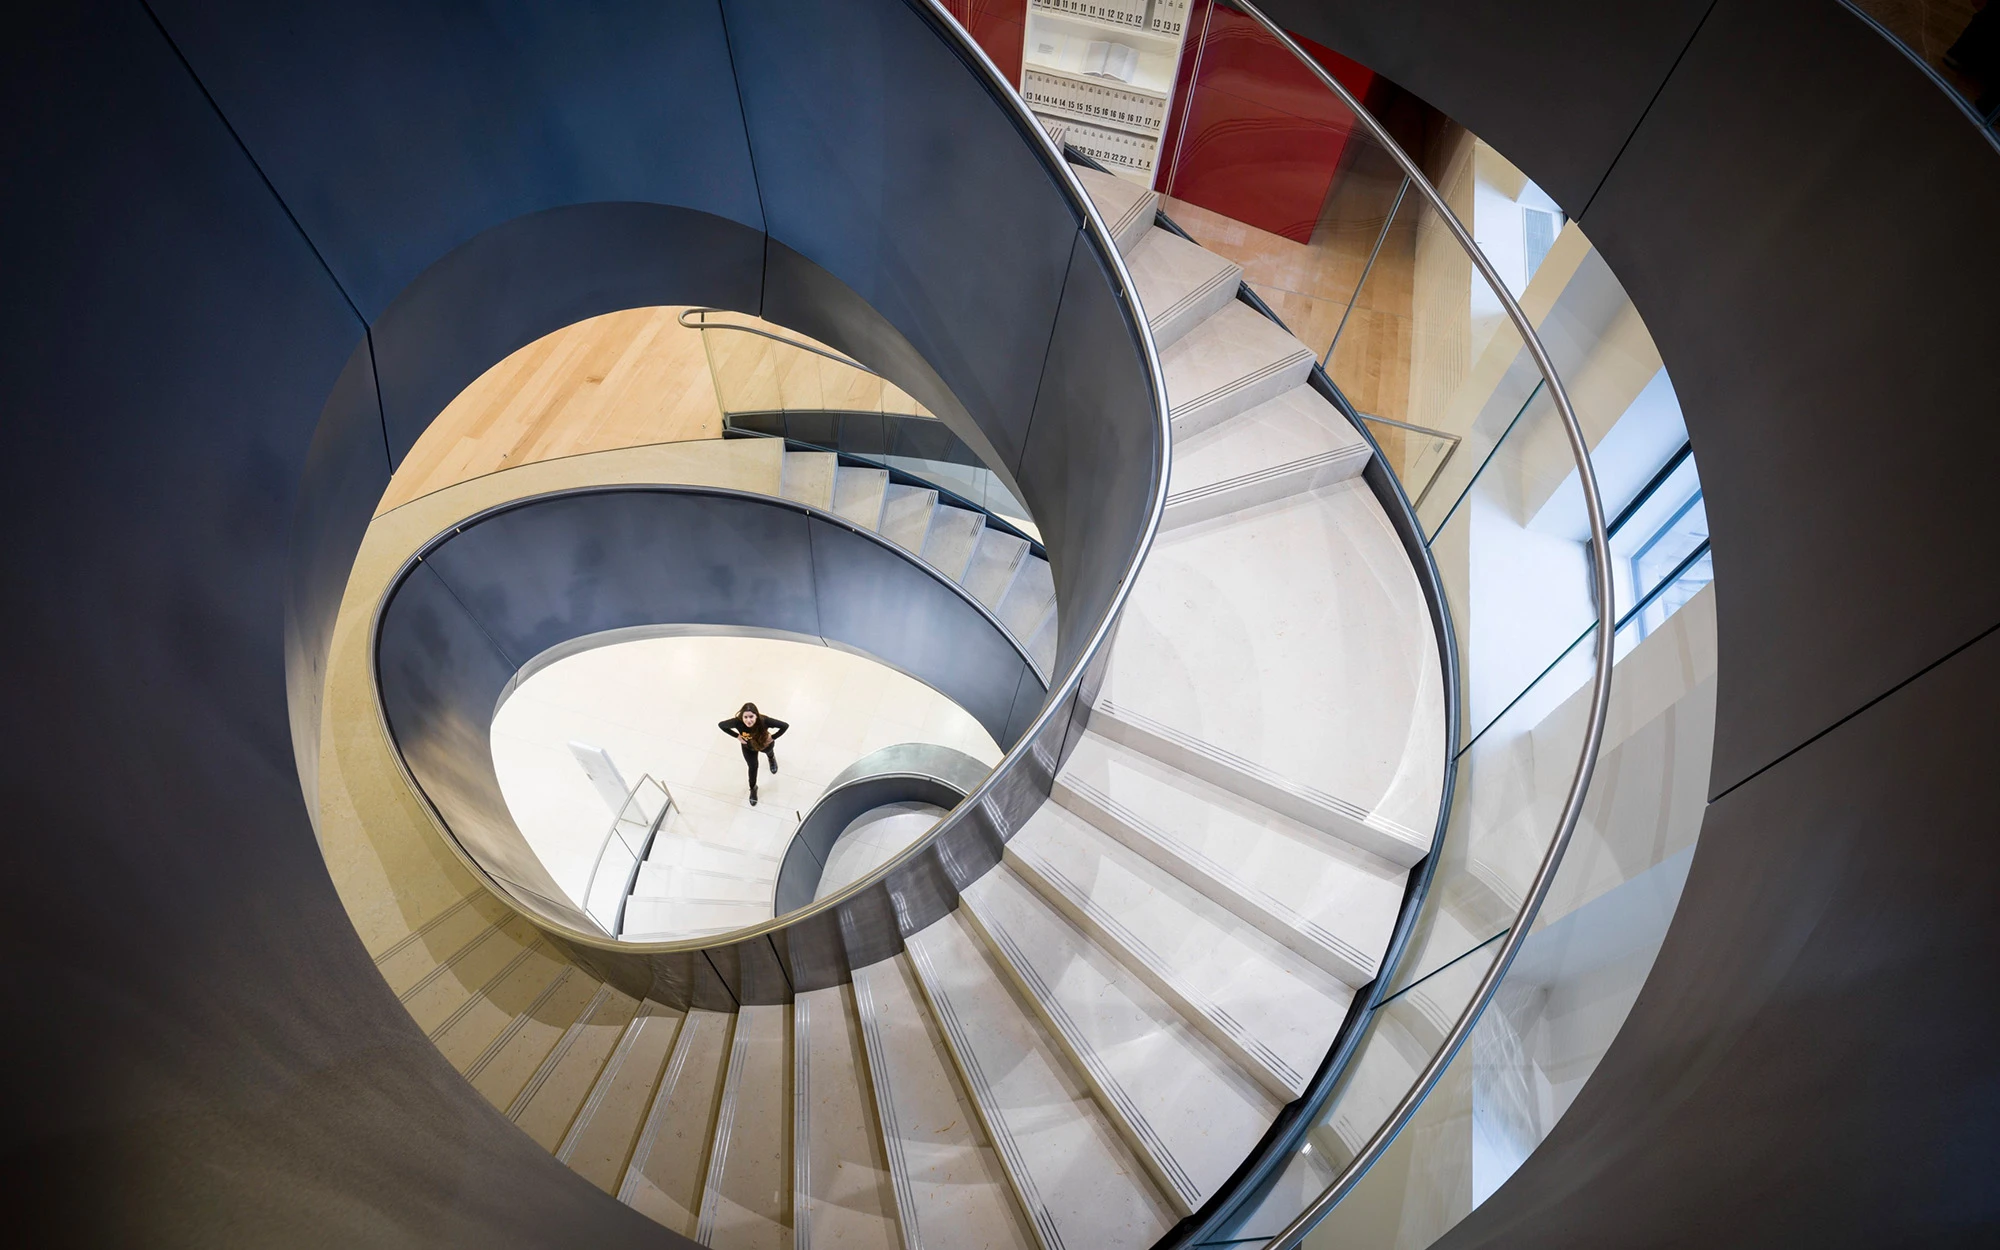 Interior spiral stairwell of the Wellcome Centre